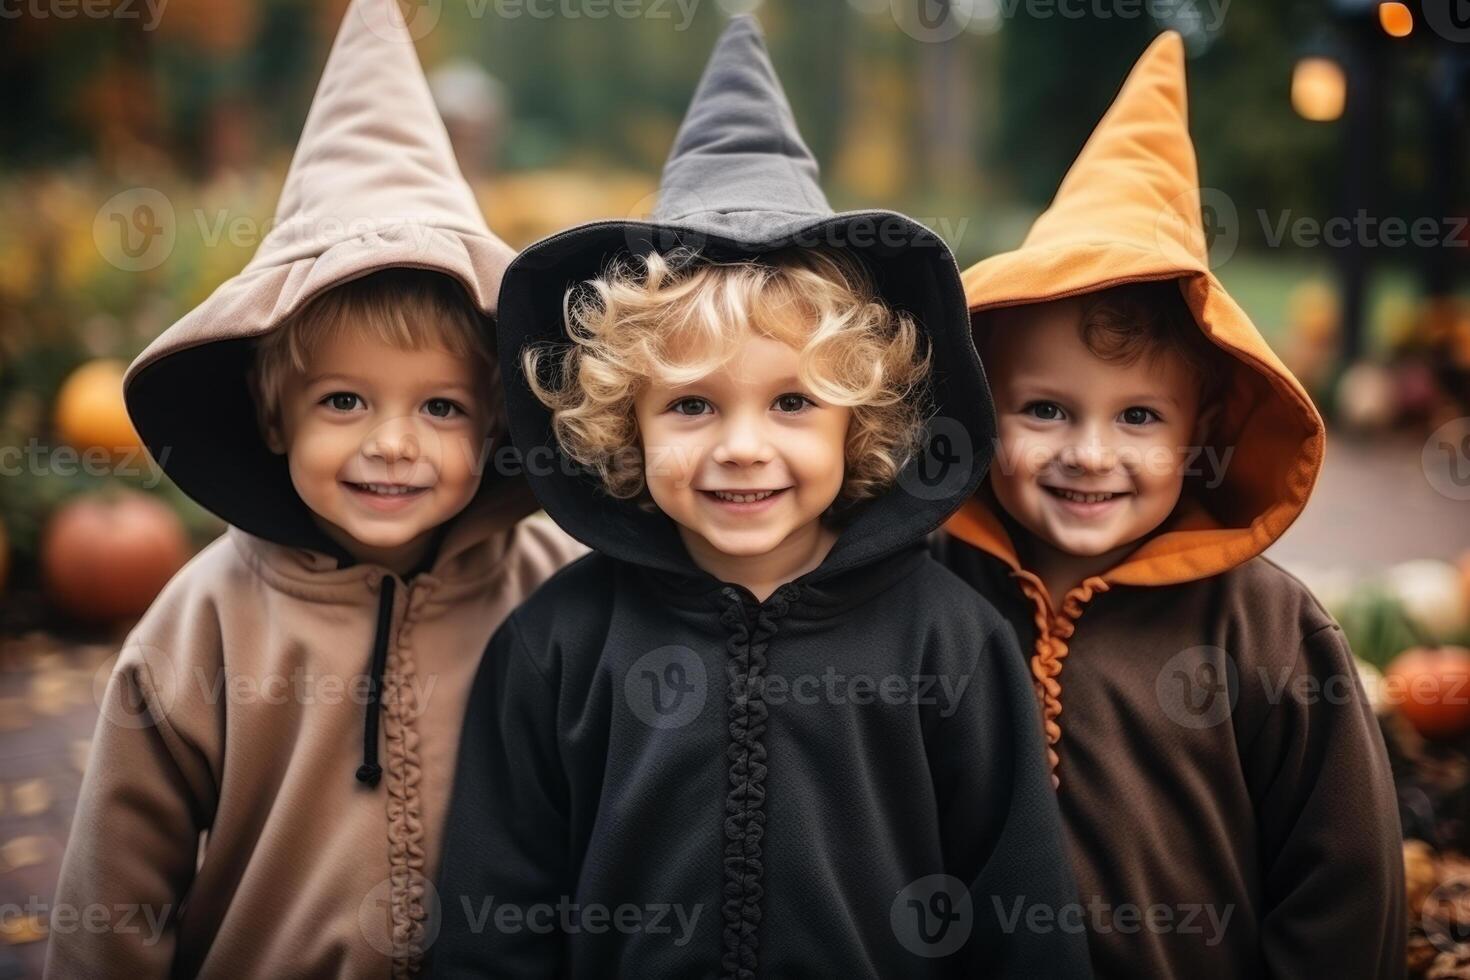 AI Generated Portrait group joyful funny toddler kids little cute children boys girls friends dresses crazy witch spooky costumes posing. Happy Halloween party pumpkins trick treat night outdoors photo